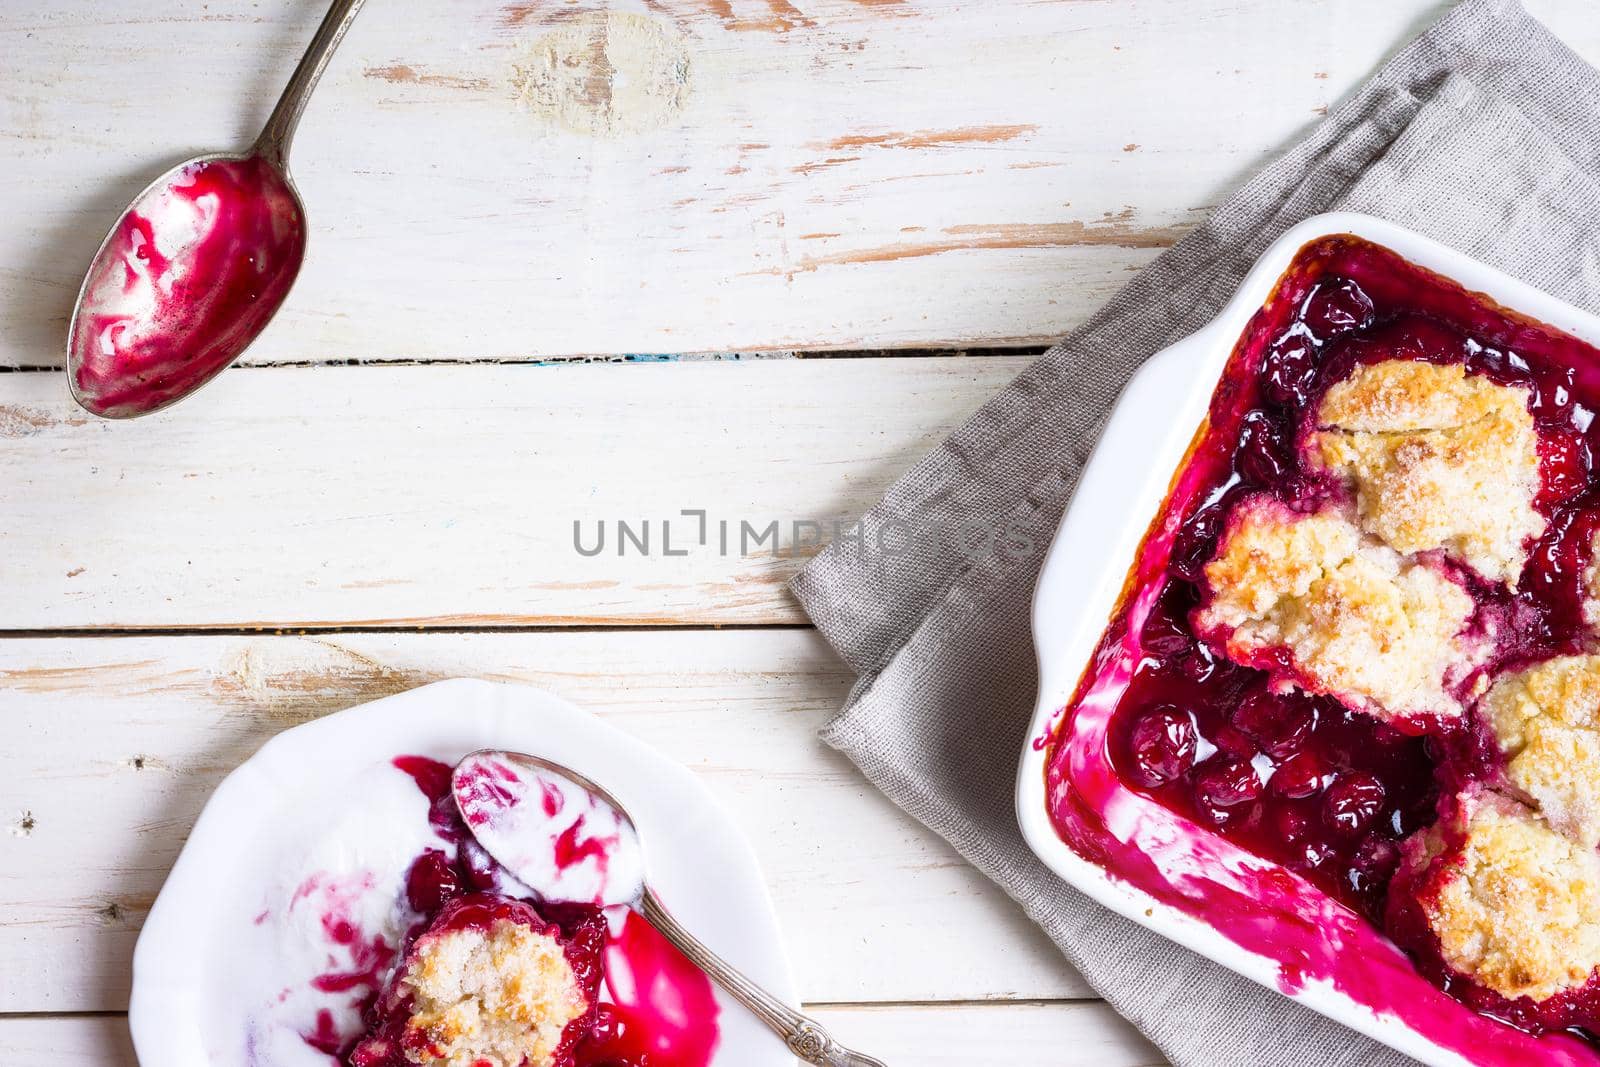 Homemade cherry cobbler pie with flaky crust, ice cream, vintage spoon, sieve for flour. Top view on the white wooden table background. Space for text